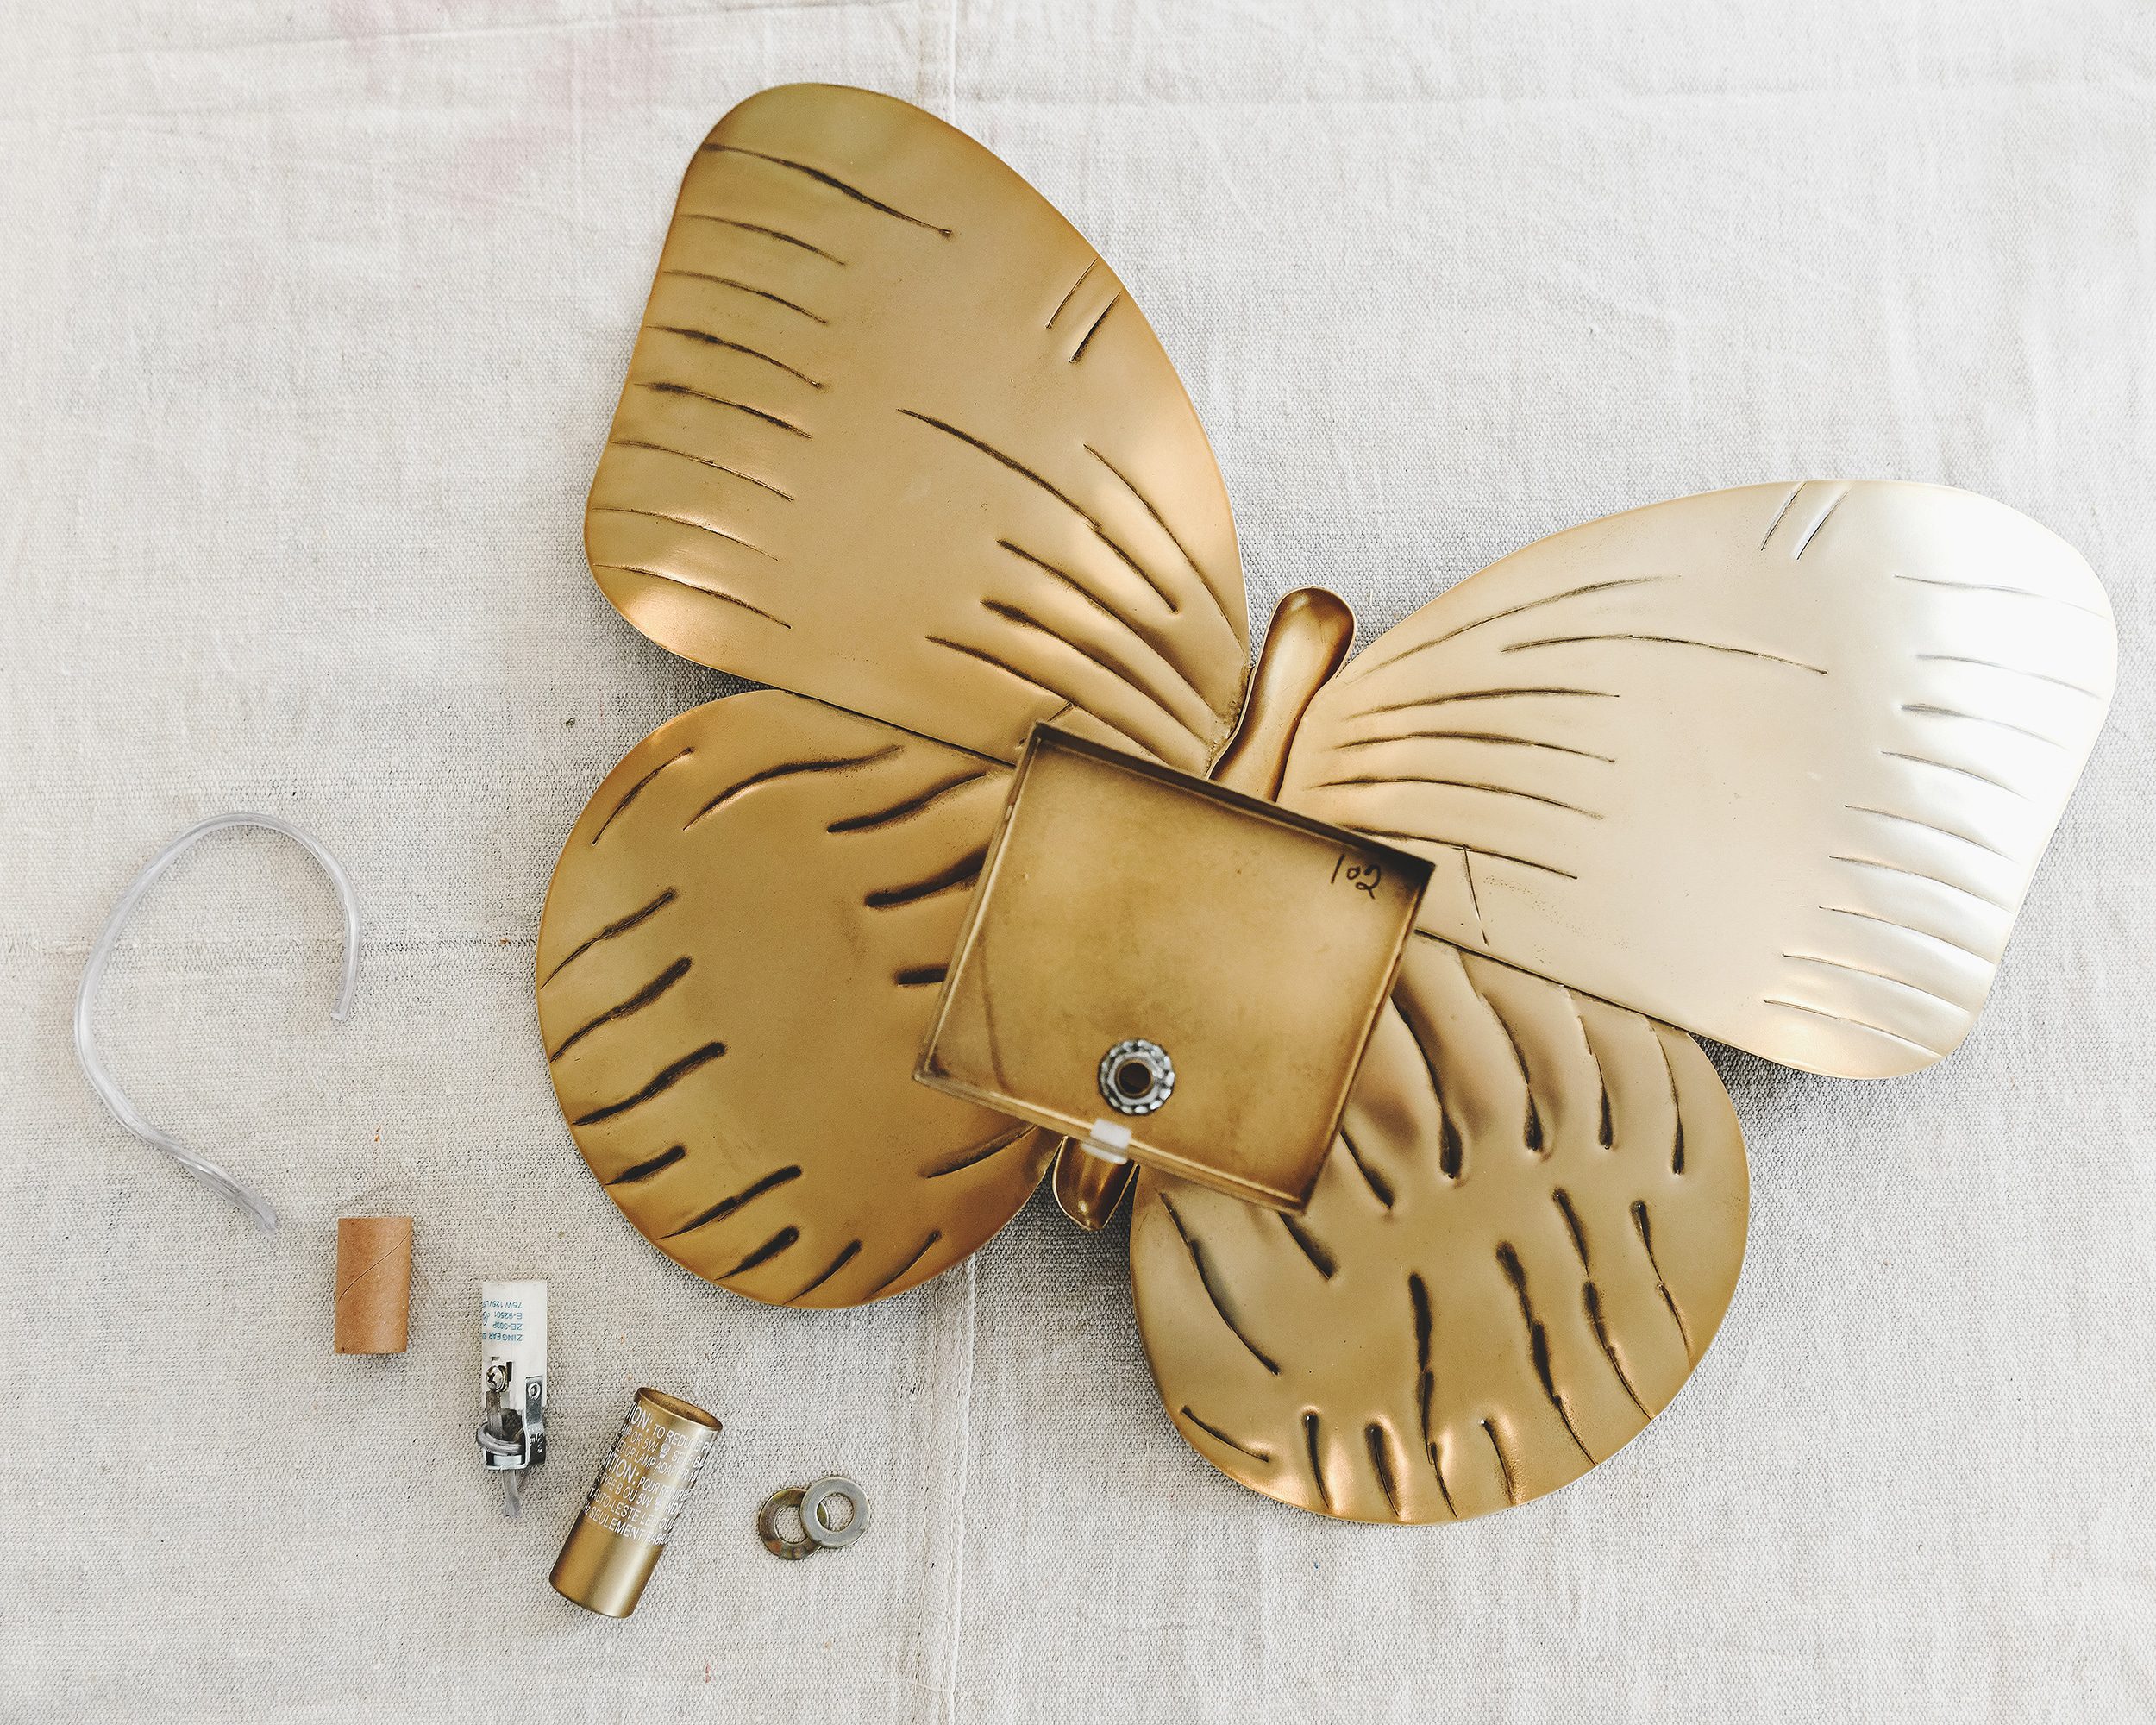 Disassembling the sconce in preparation for rewiring // via Yellow Brick Home